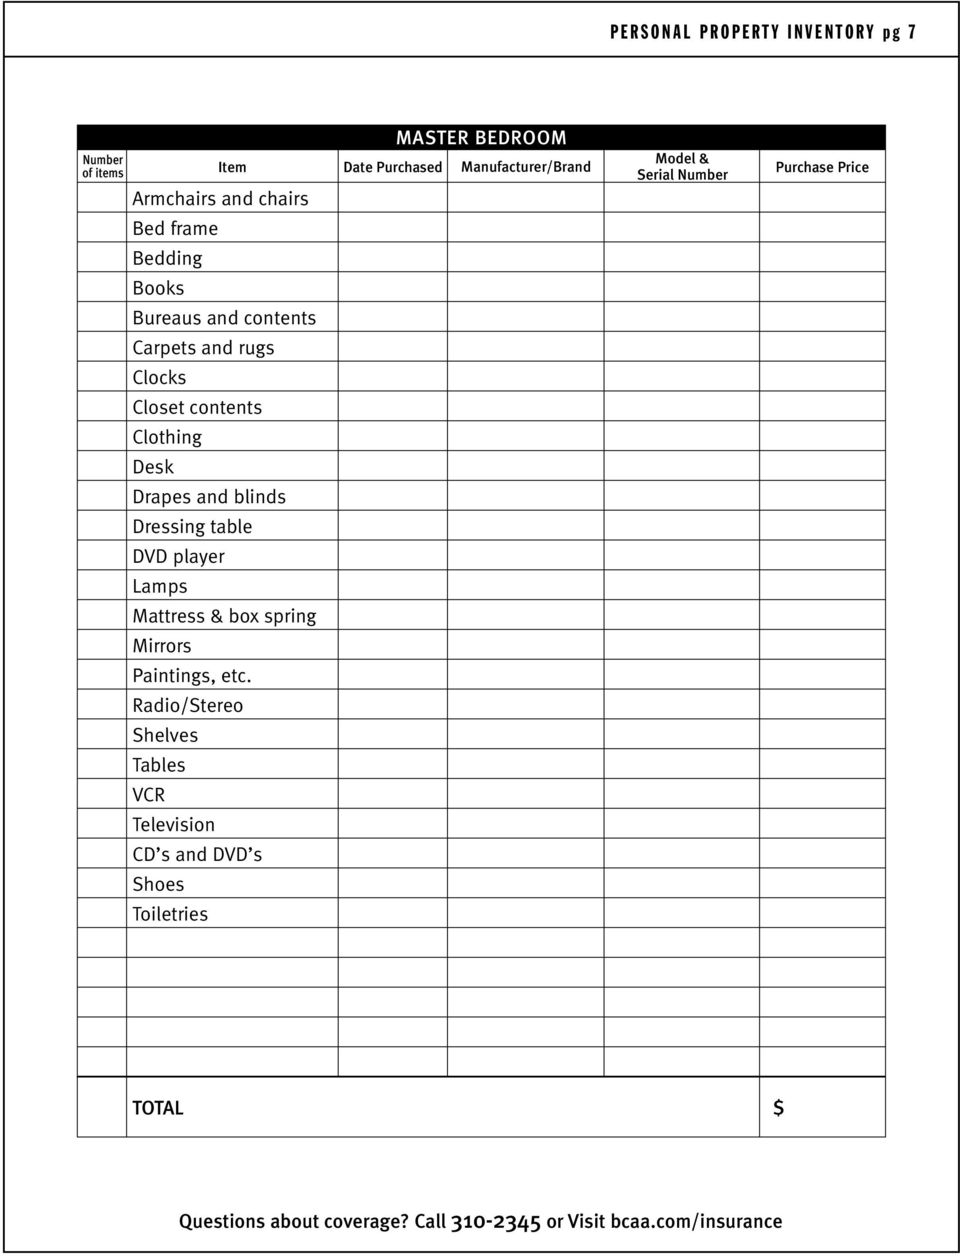 Personal Property Inventory Pdf Free Download